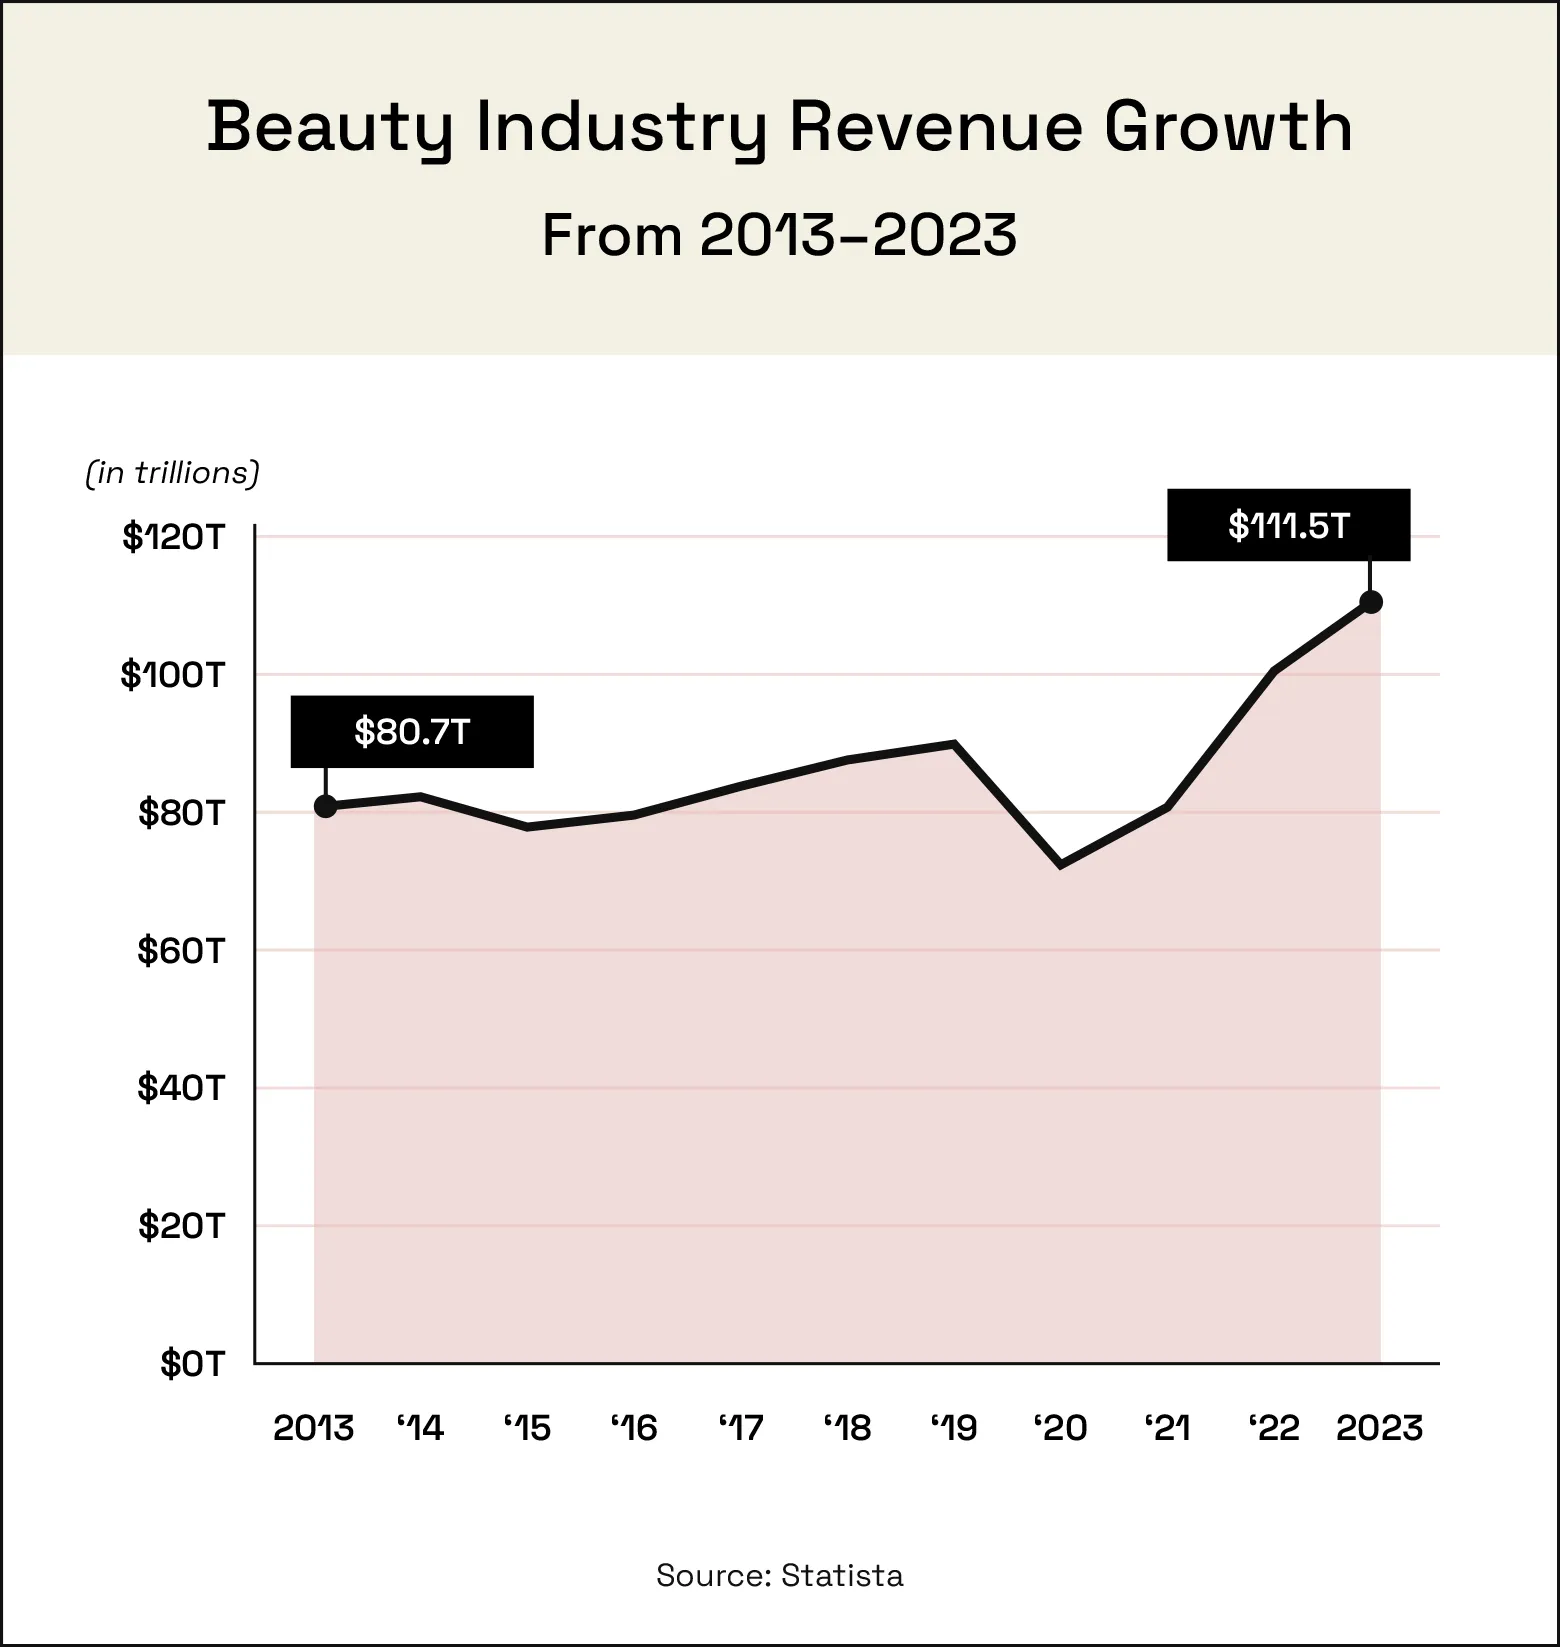 Graph shows beauty industry revenue growth from 2013 to projections for 2023.